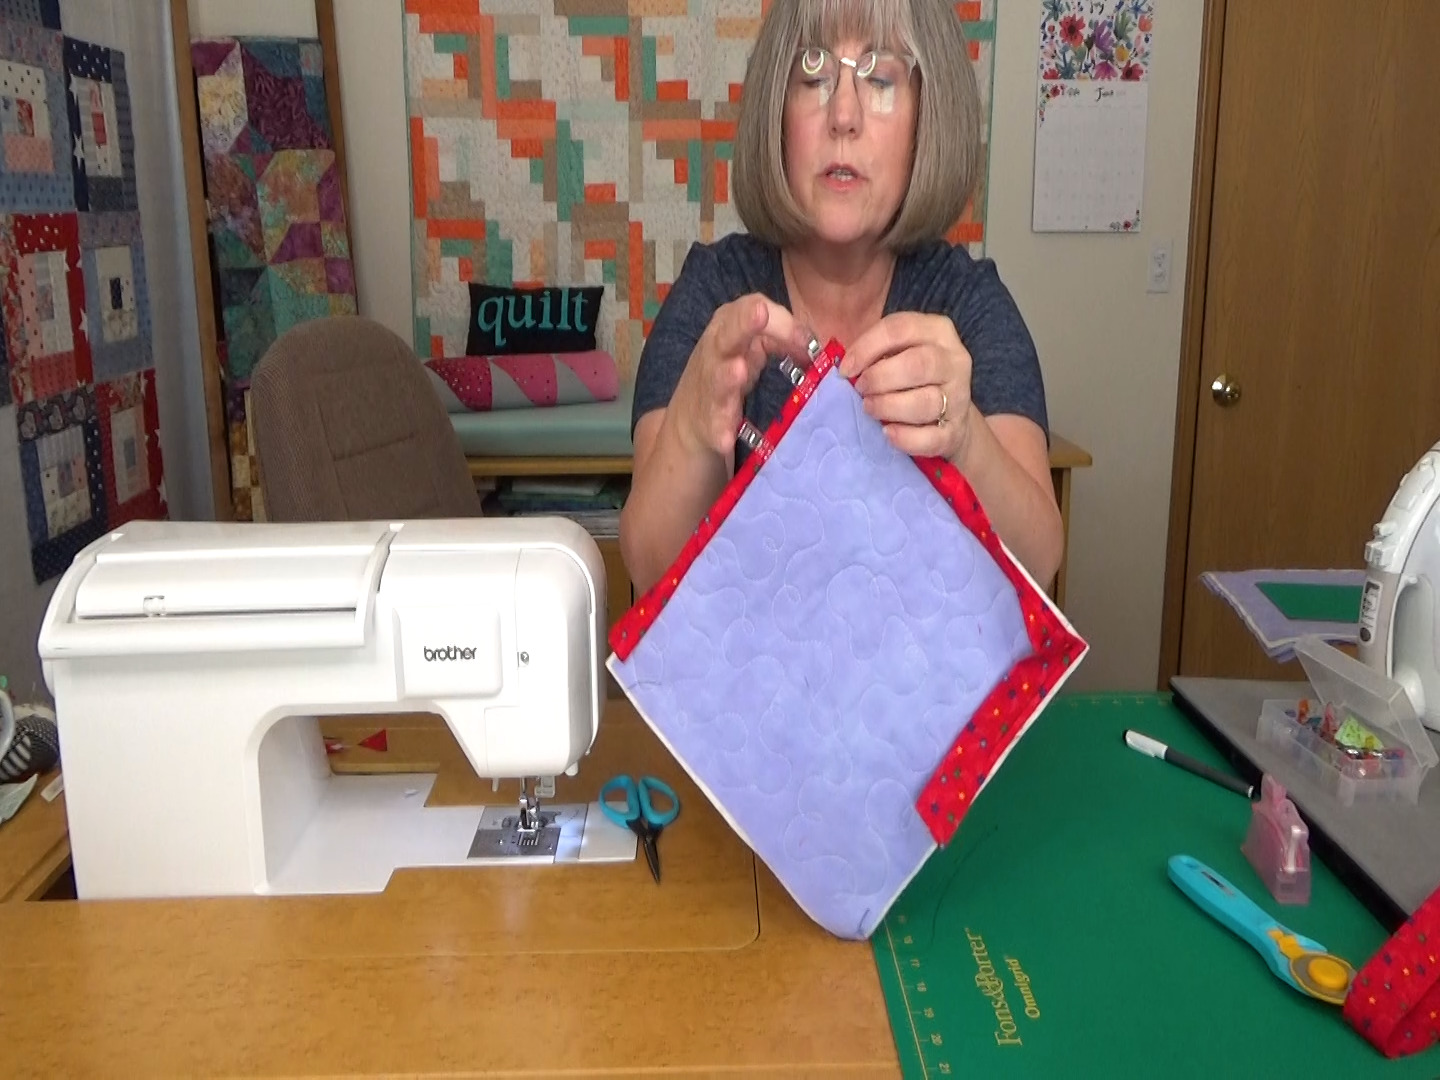 The Binding Tool For Quilting -  Canada